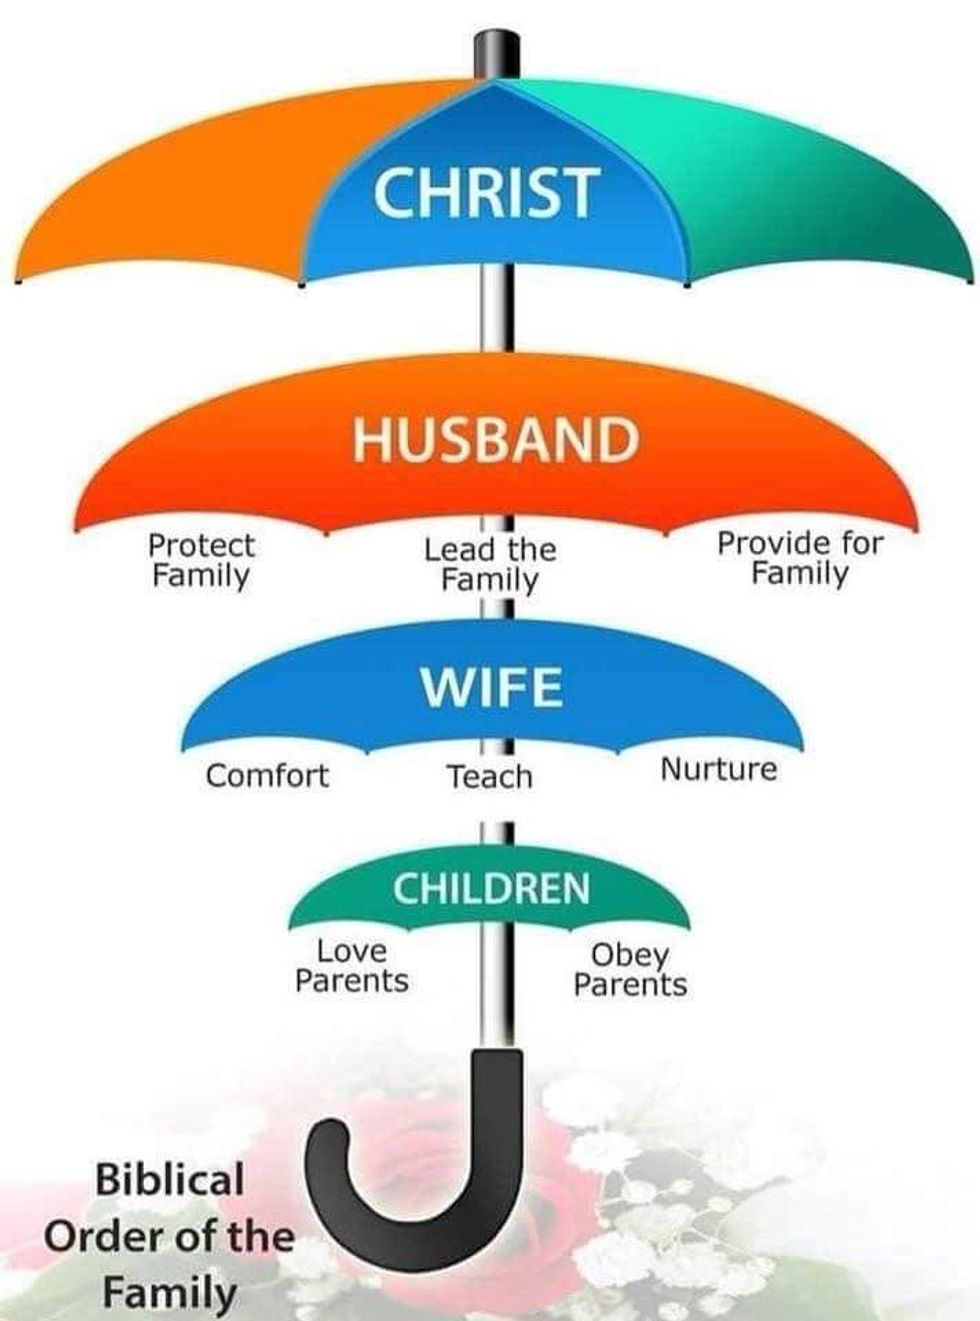 Umbrella of authority showing that Christ has authority over a husband, a husband and Christ have authority over a wife, a wife, husband and Christ all have authority over children.